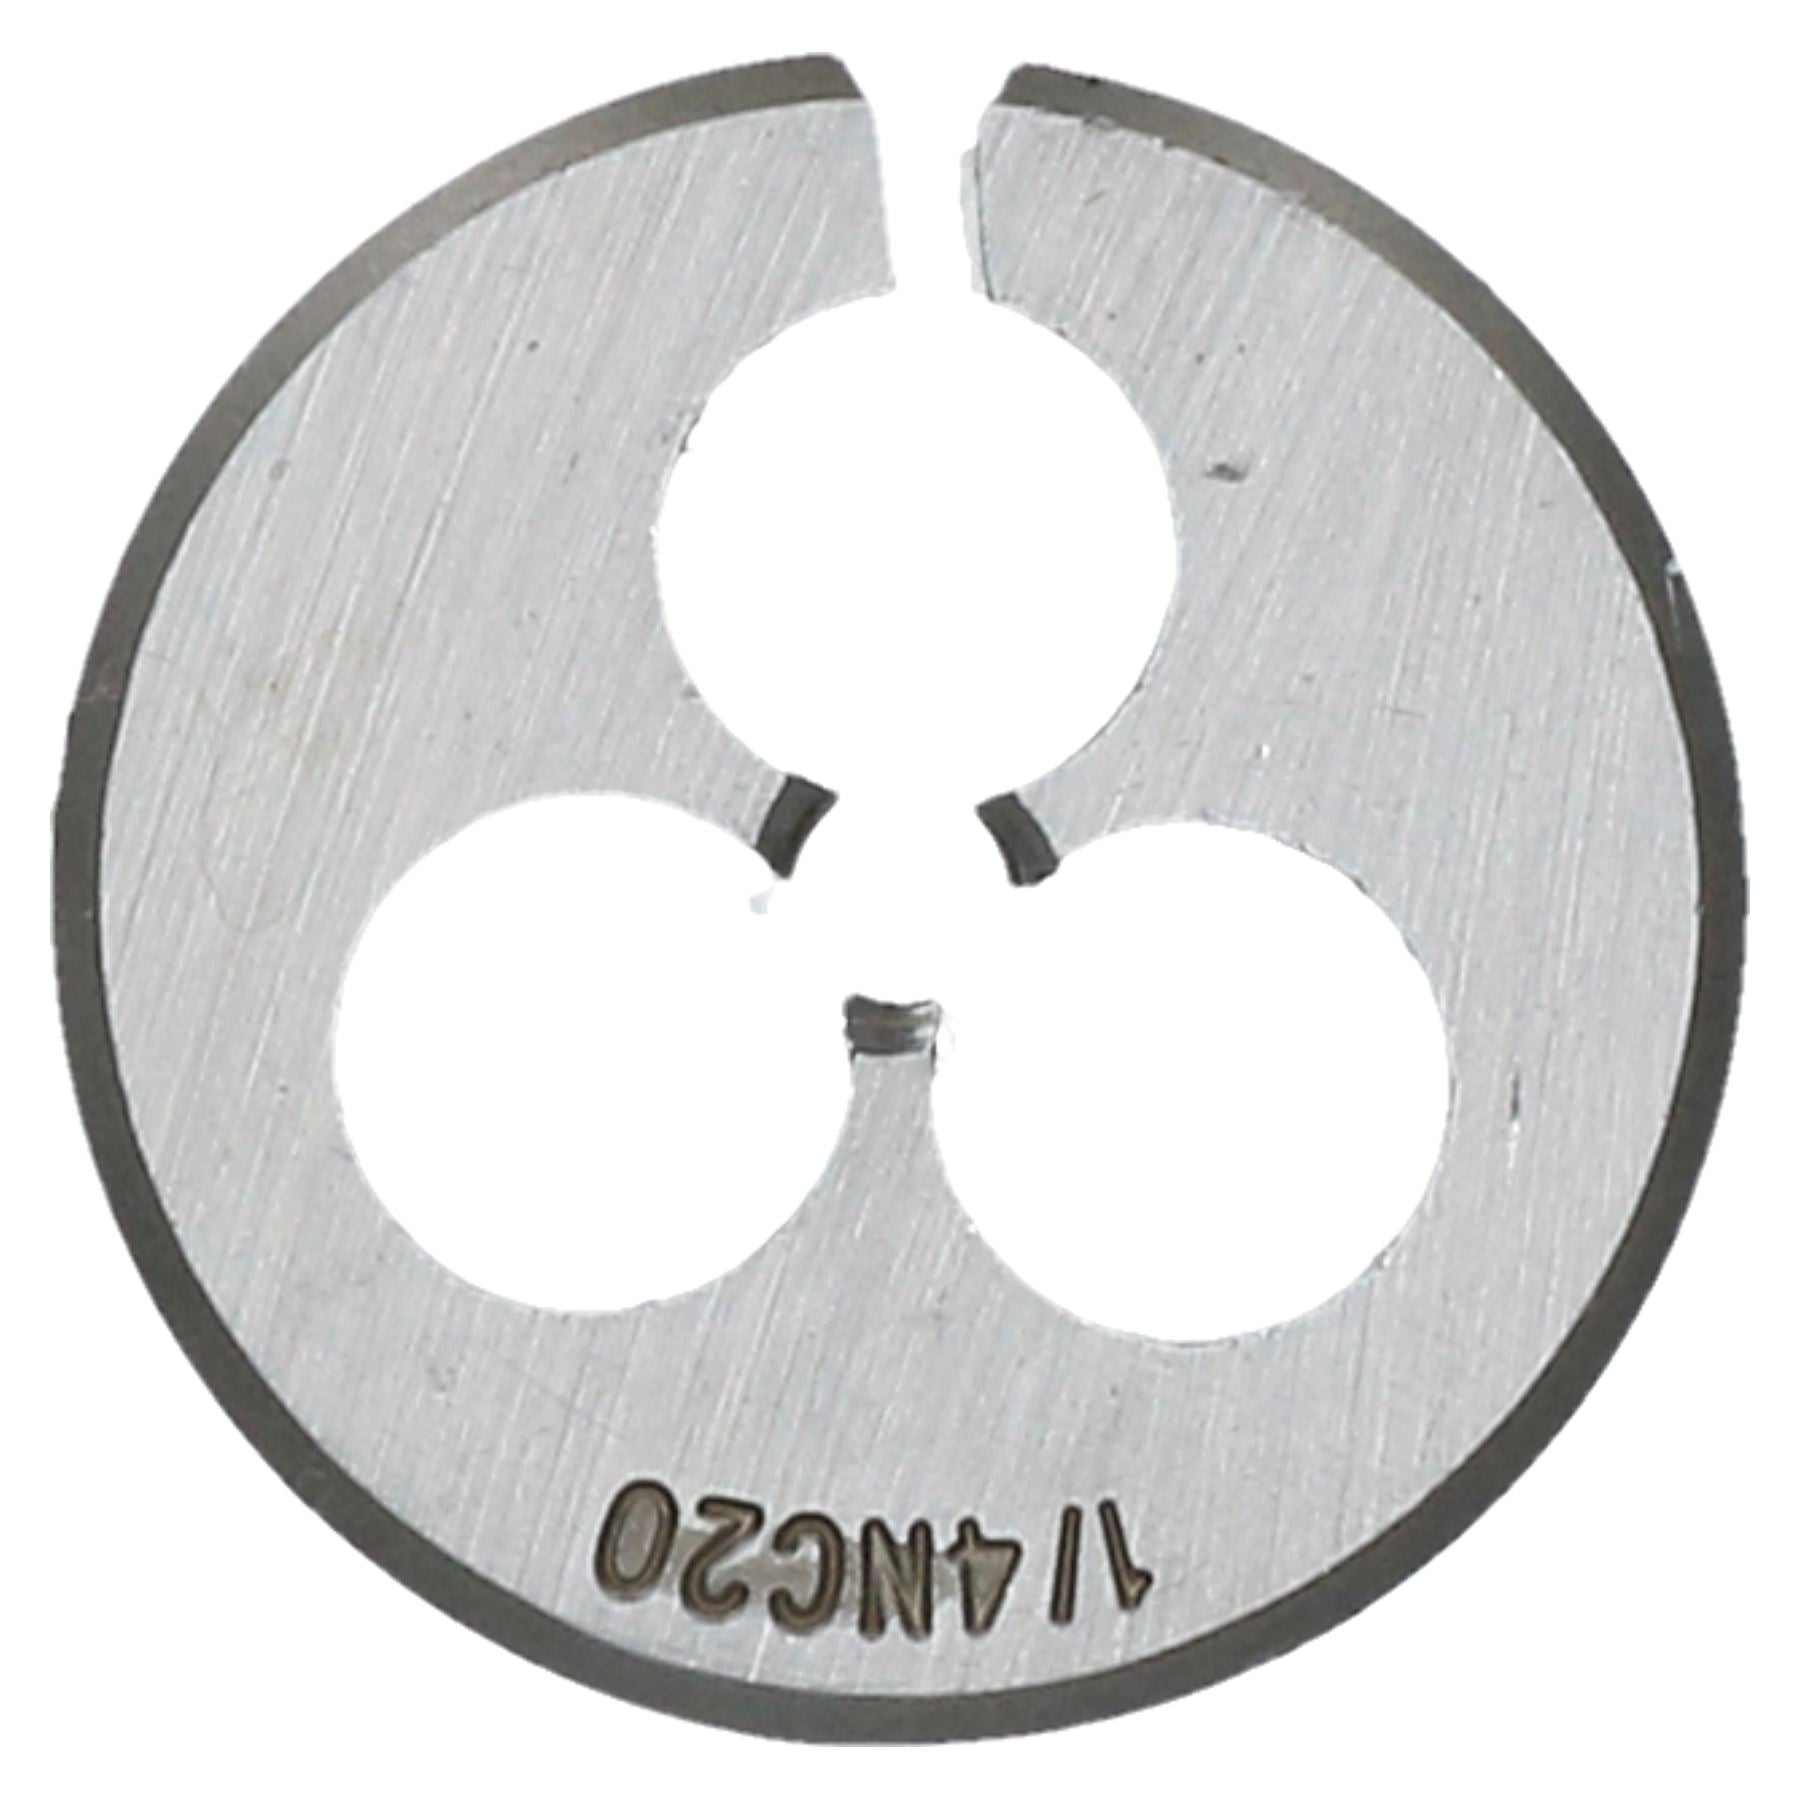 38mm 1.5" UNC Imperial Die Thread Cutter Sizes from 1/2" - 3/4" Rethreading